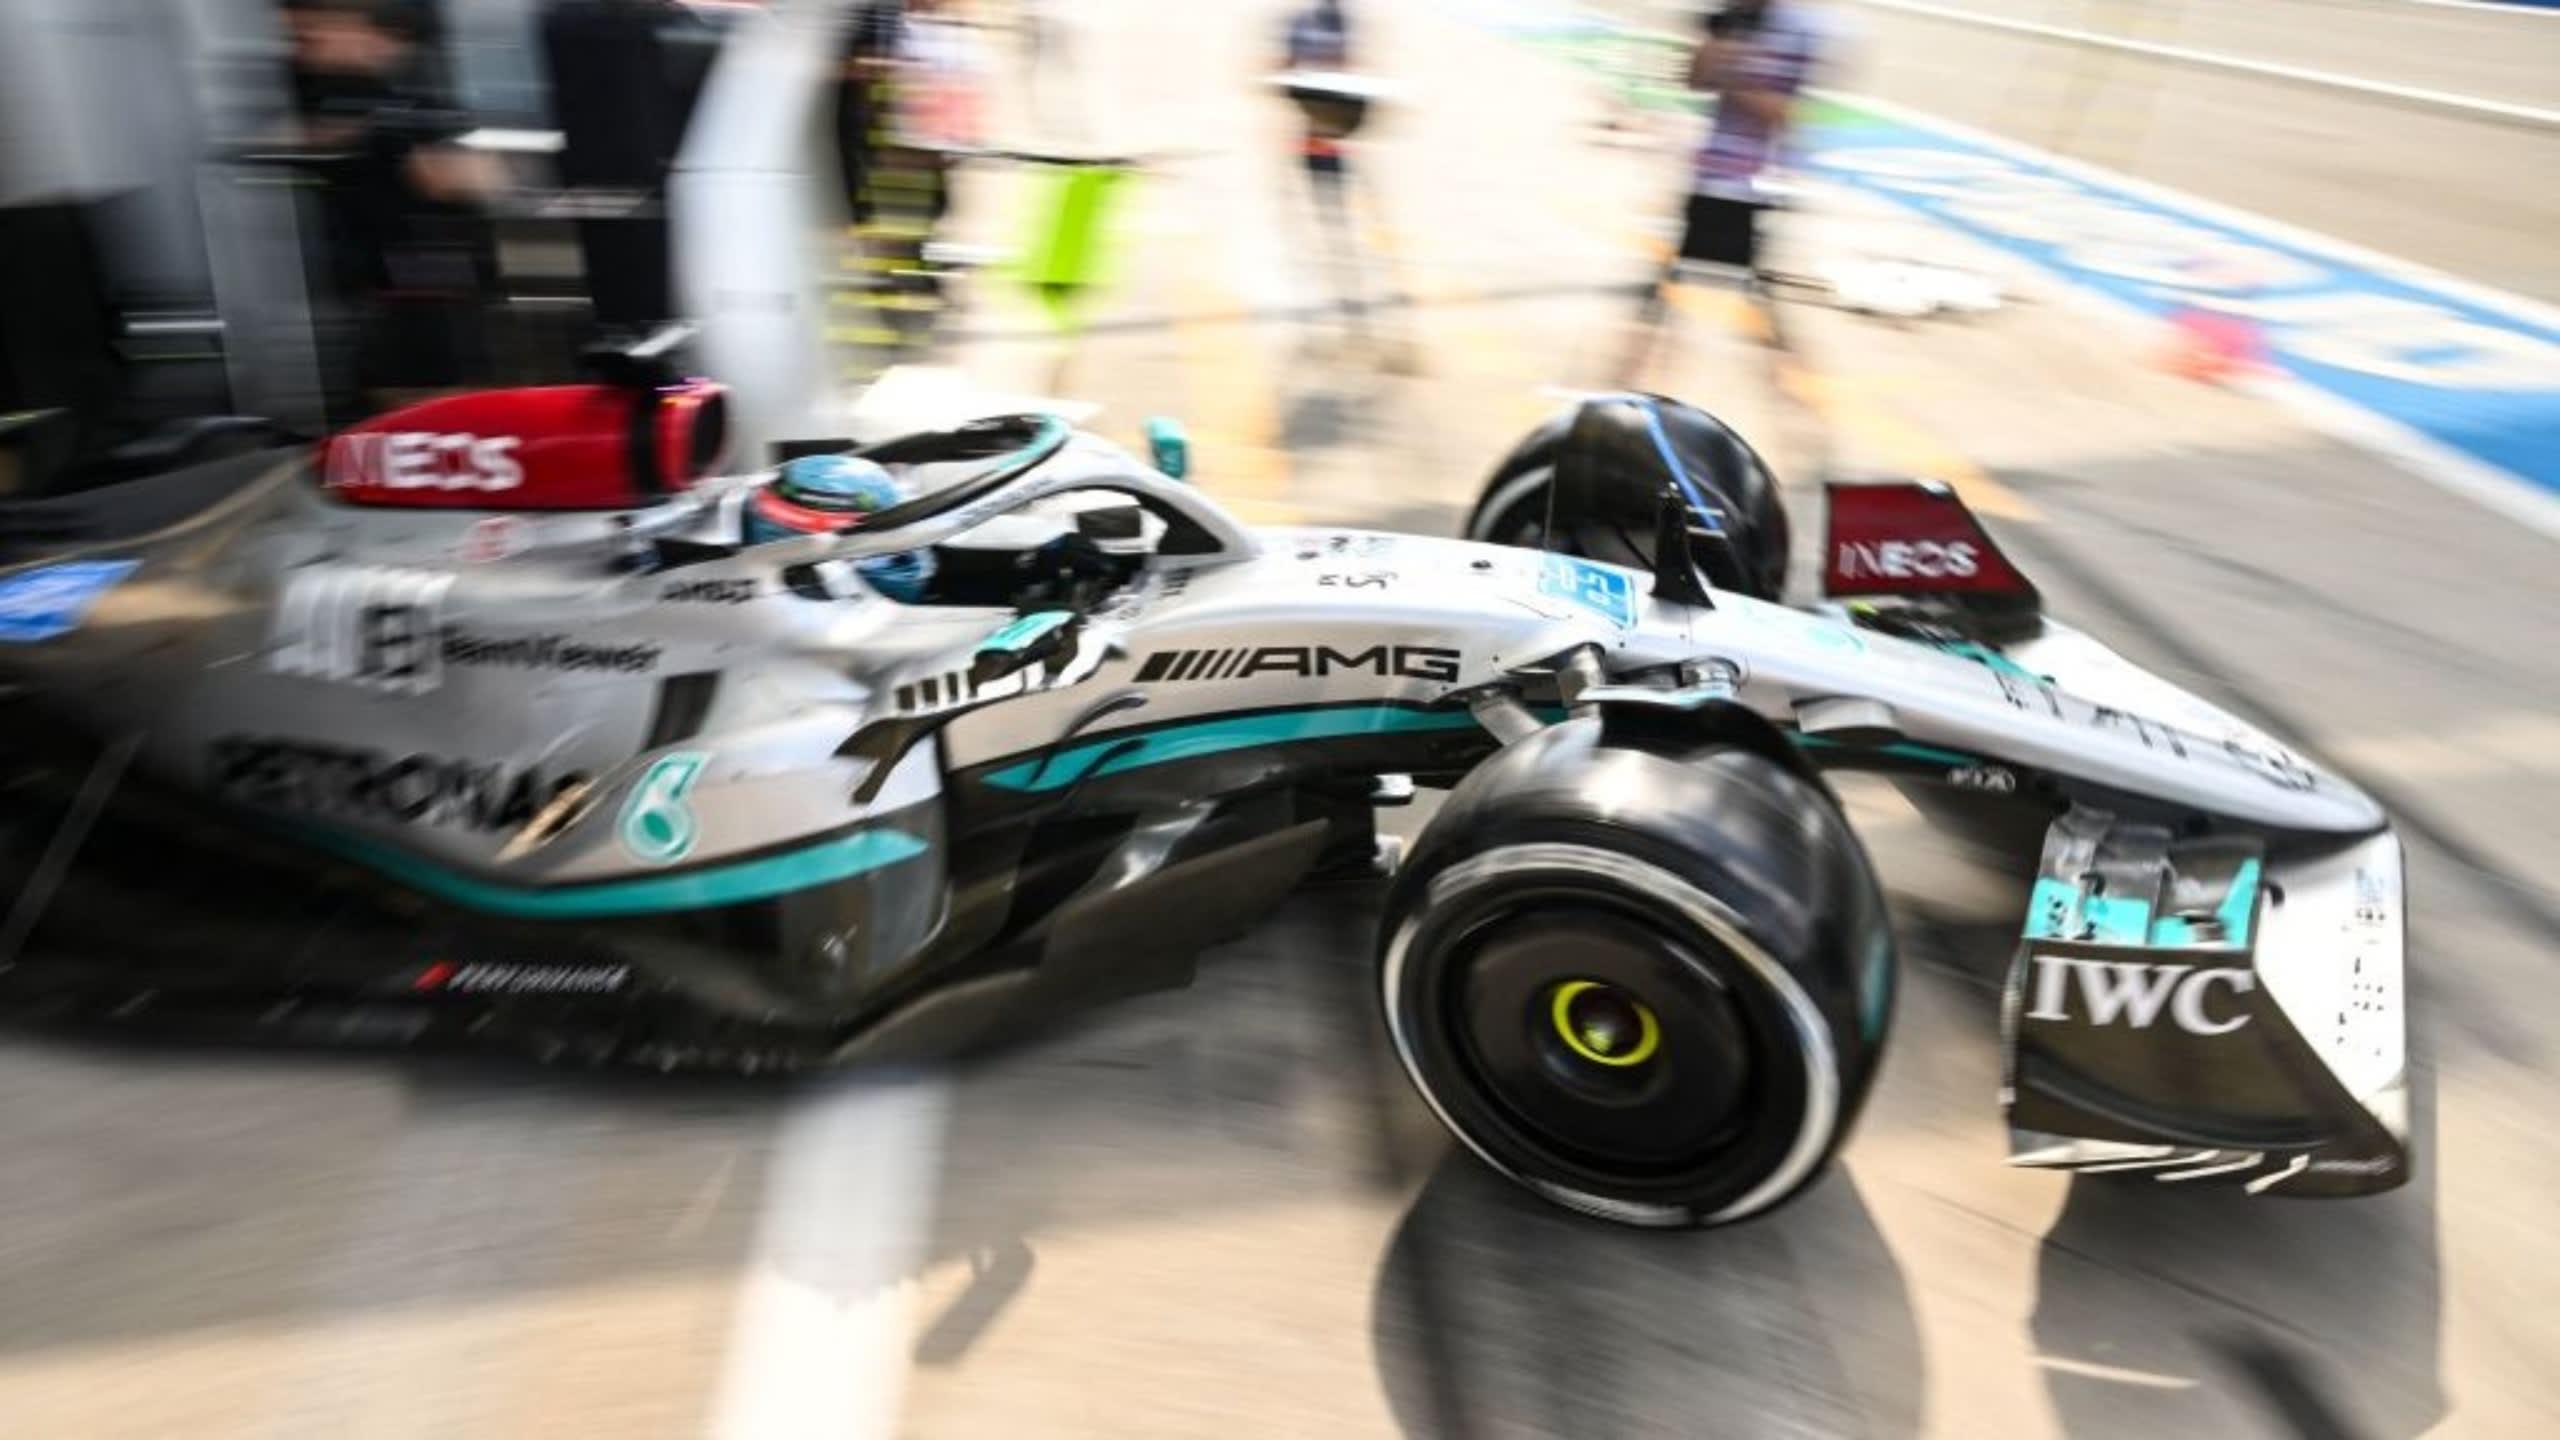 Mercedes' British driver Lewis Hamilton steers his car in the pit lane during the first practice session ahead of the Italian Formula One Grand Prix at the Autodromo Nazionale circuit in Monza on September 9, 2022. (Photo by ANDREJ ISAKOVIC / AFP) (Photo by ANDREJ ISAKOVIC/AFP via Getty Images)